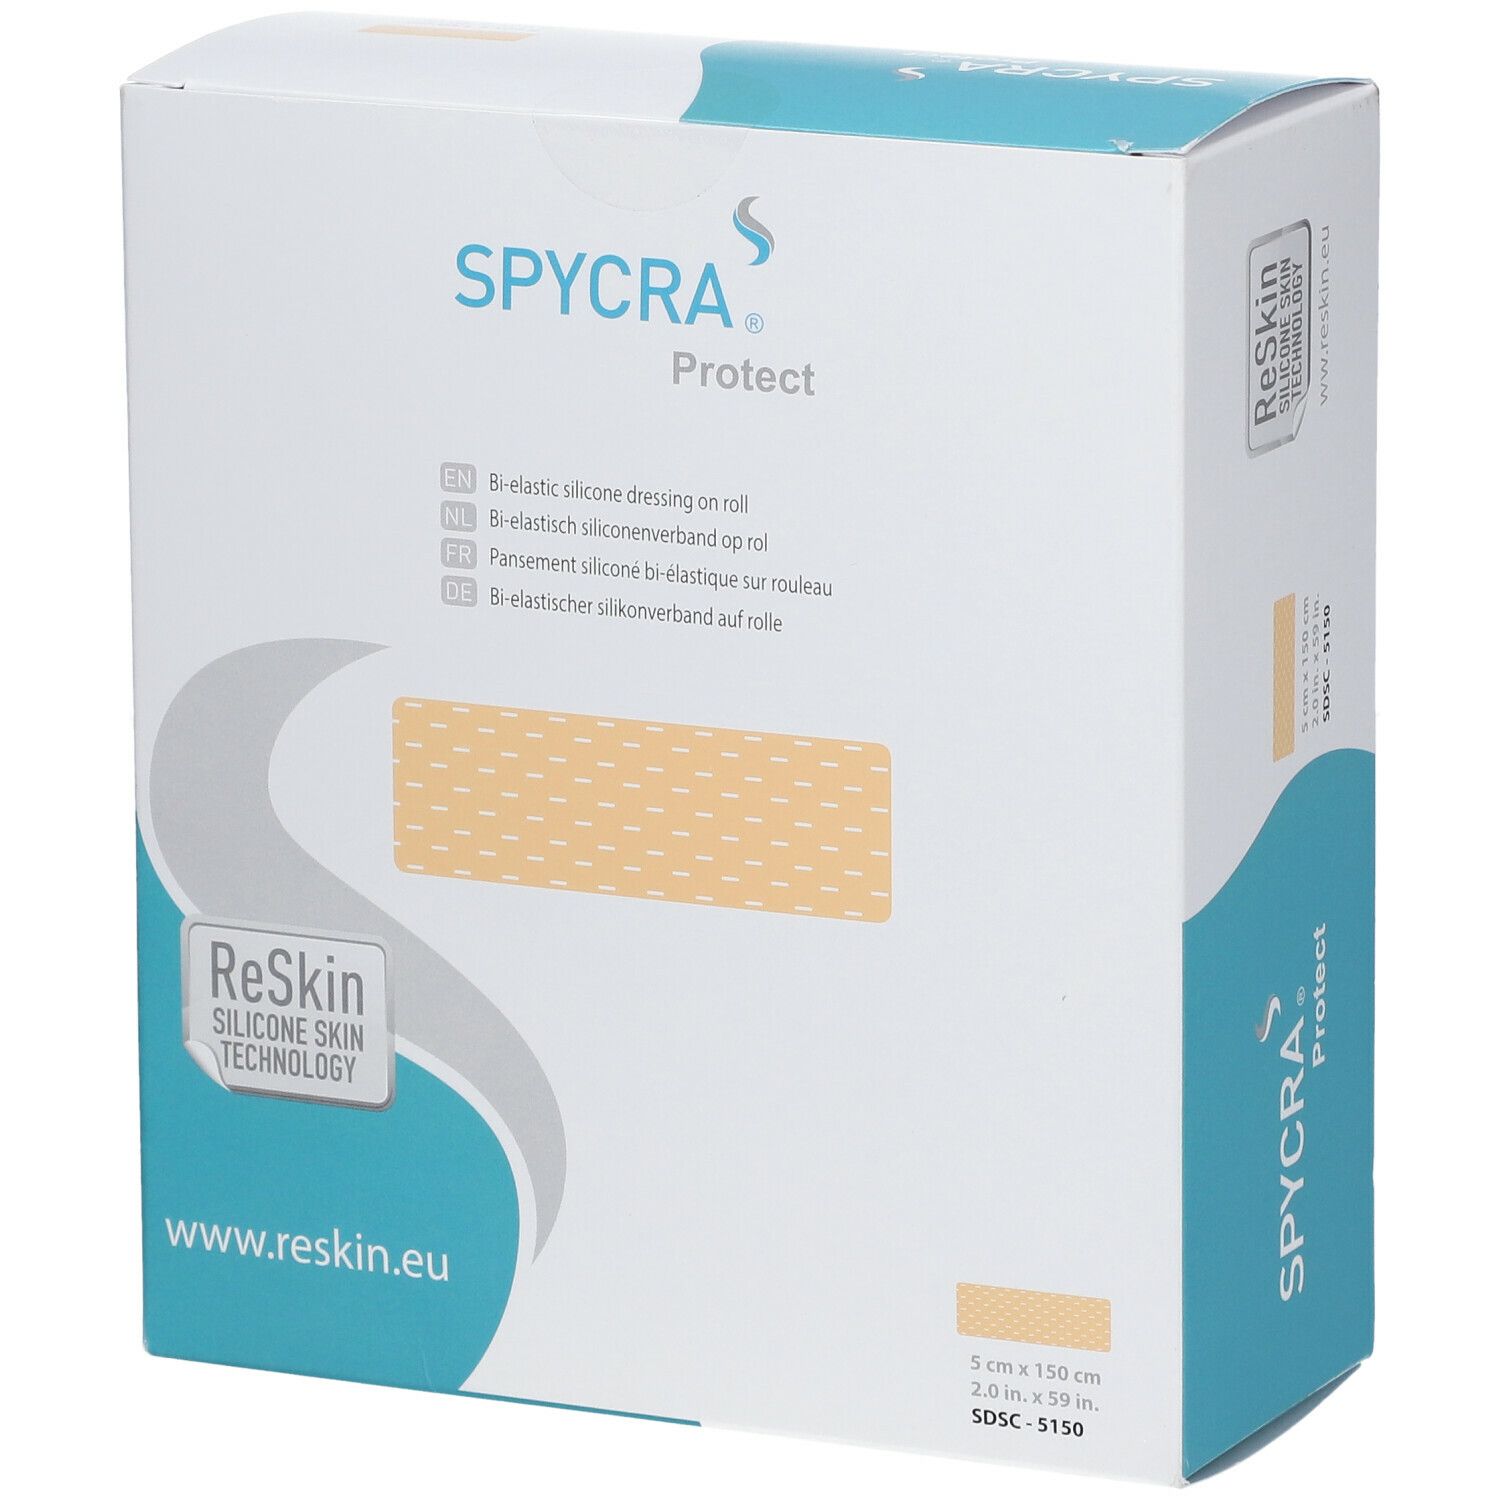 SPYCRA® Protect Pansement Silicone 5 x 150 cm 1 pc(s) - Redcare